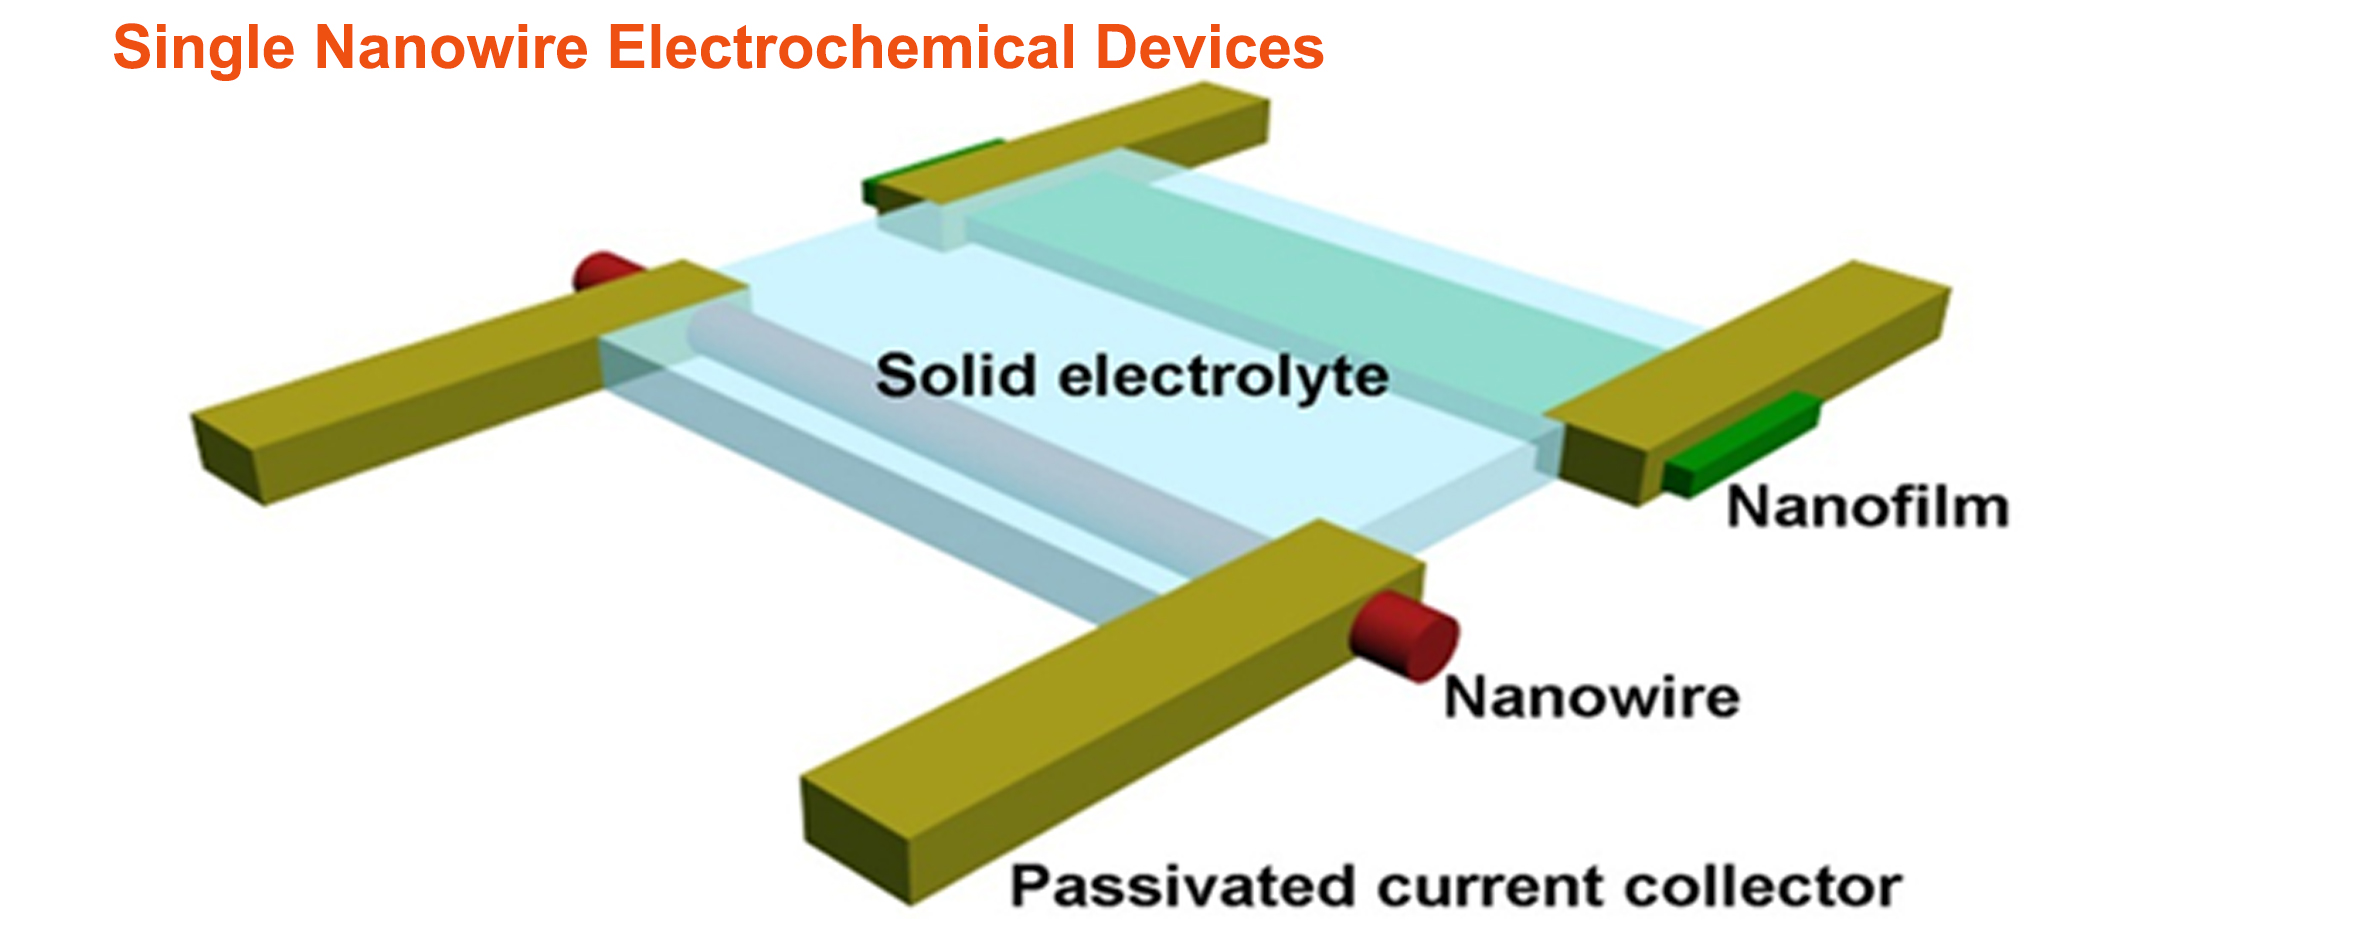 Single Nanowire Electrochemical Devices